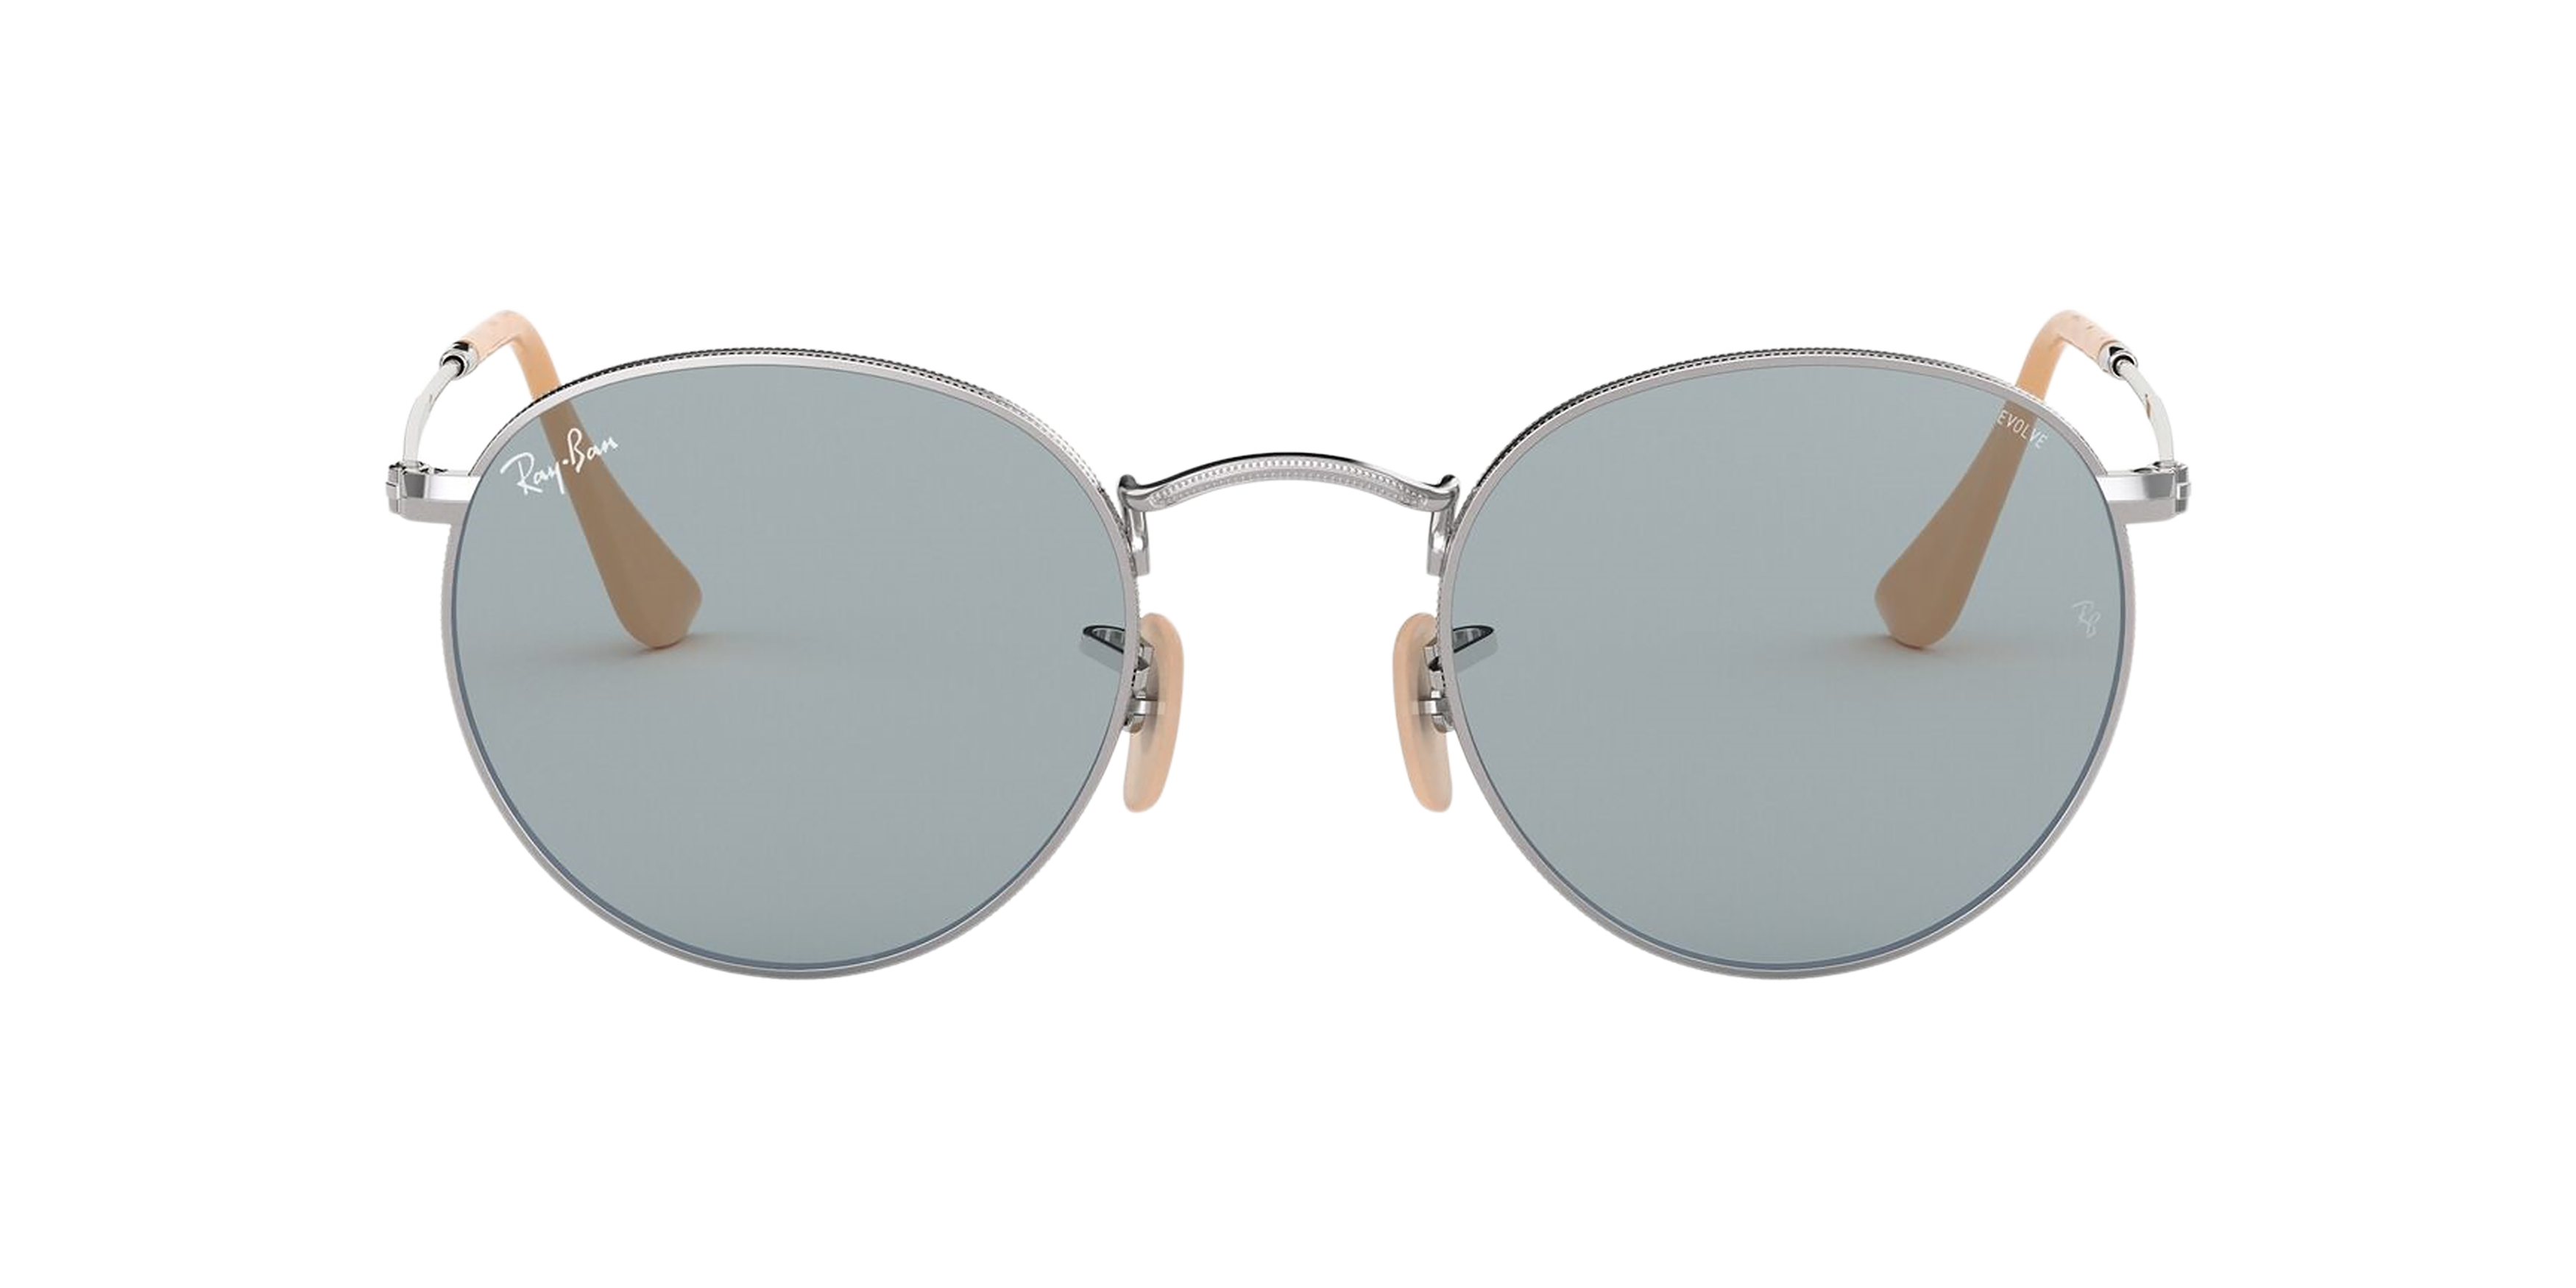 [products.image.front] RAY-BAN RB3447 9065I5